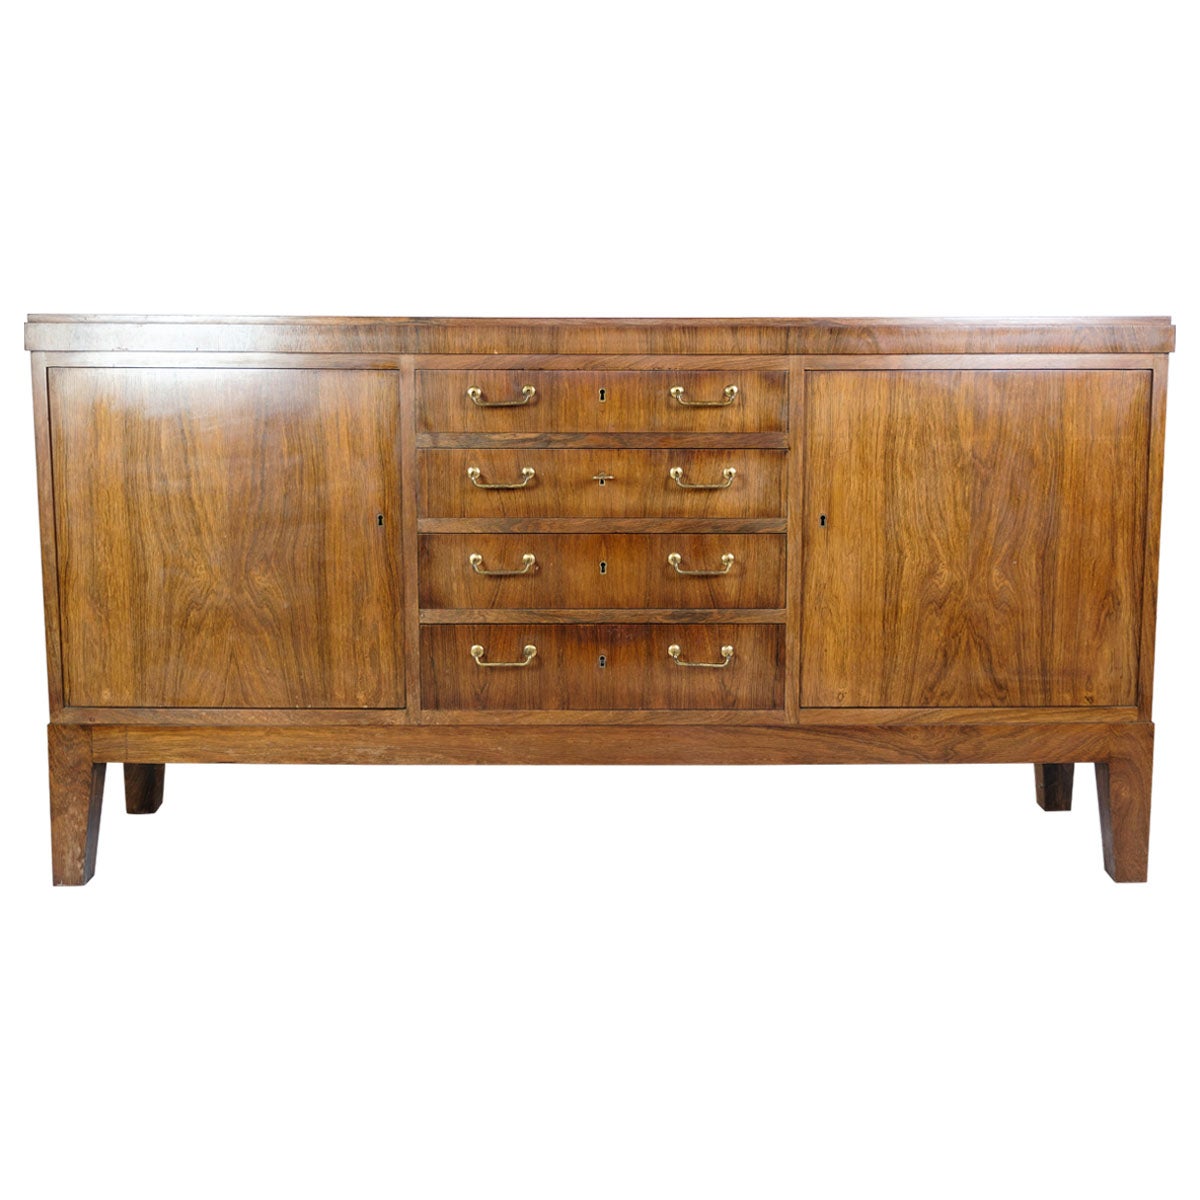 Low Sideboard in Rosewood with Brass Handles of Danish Carpenter From 1950s For Sale